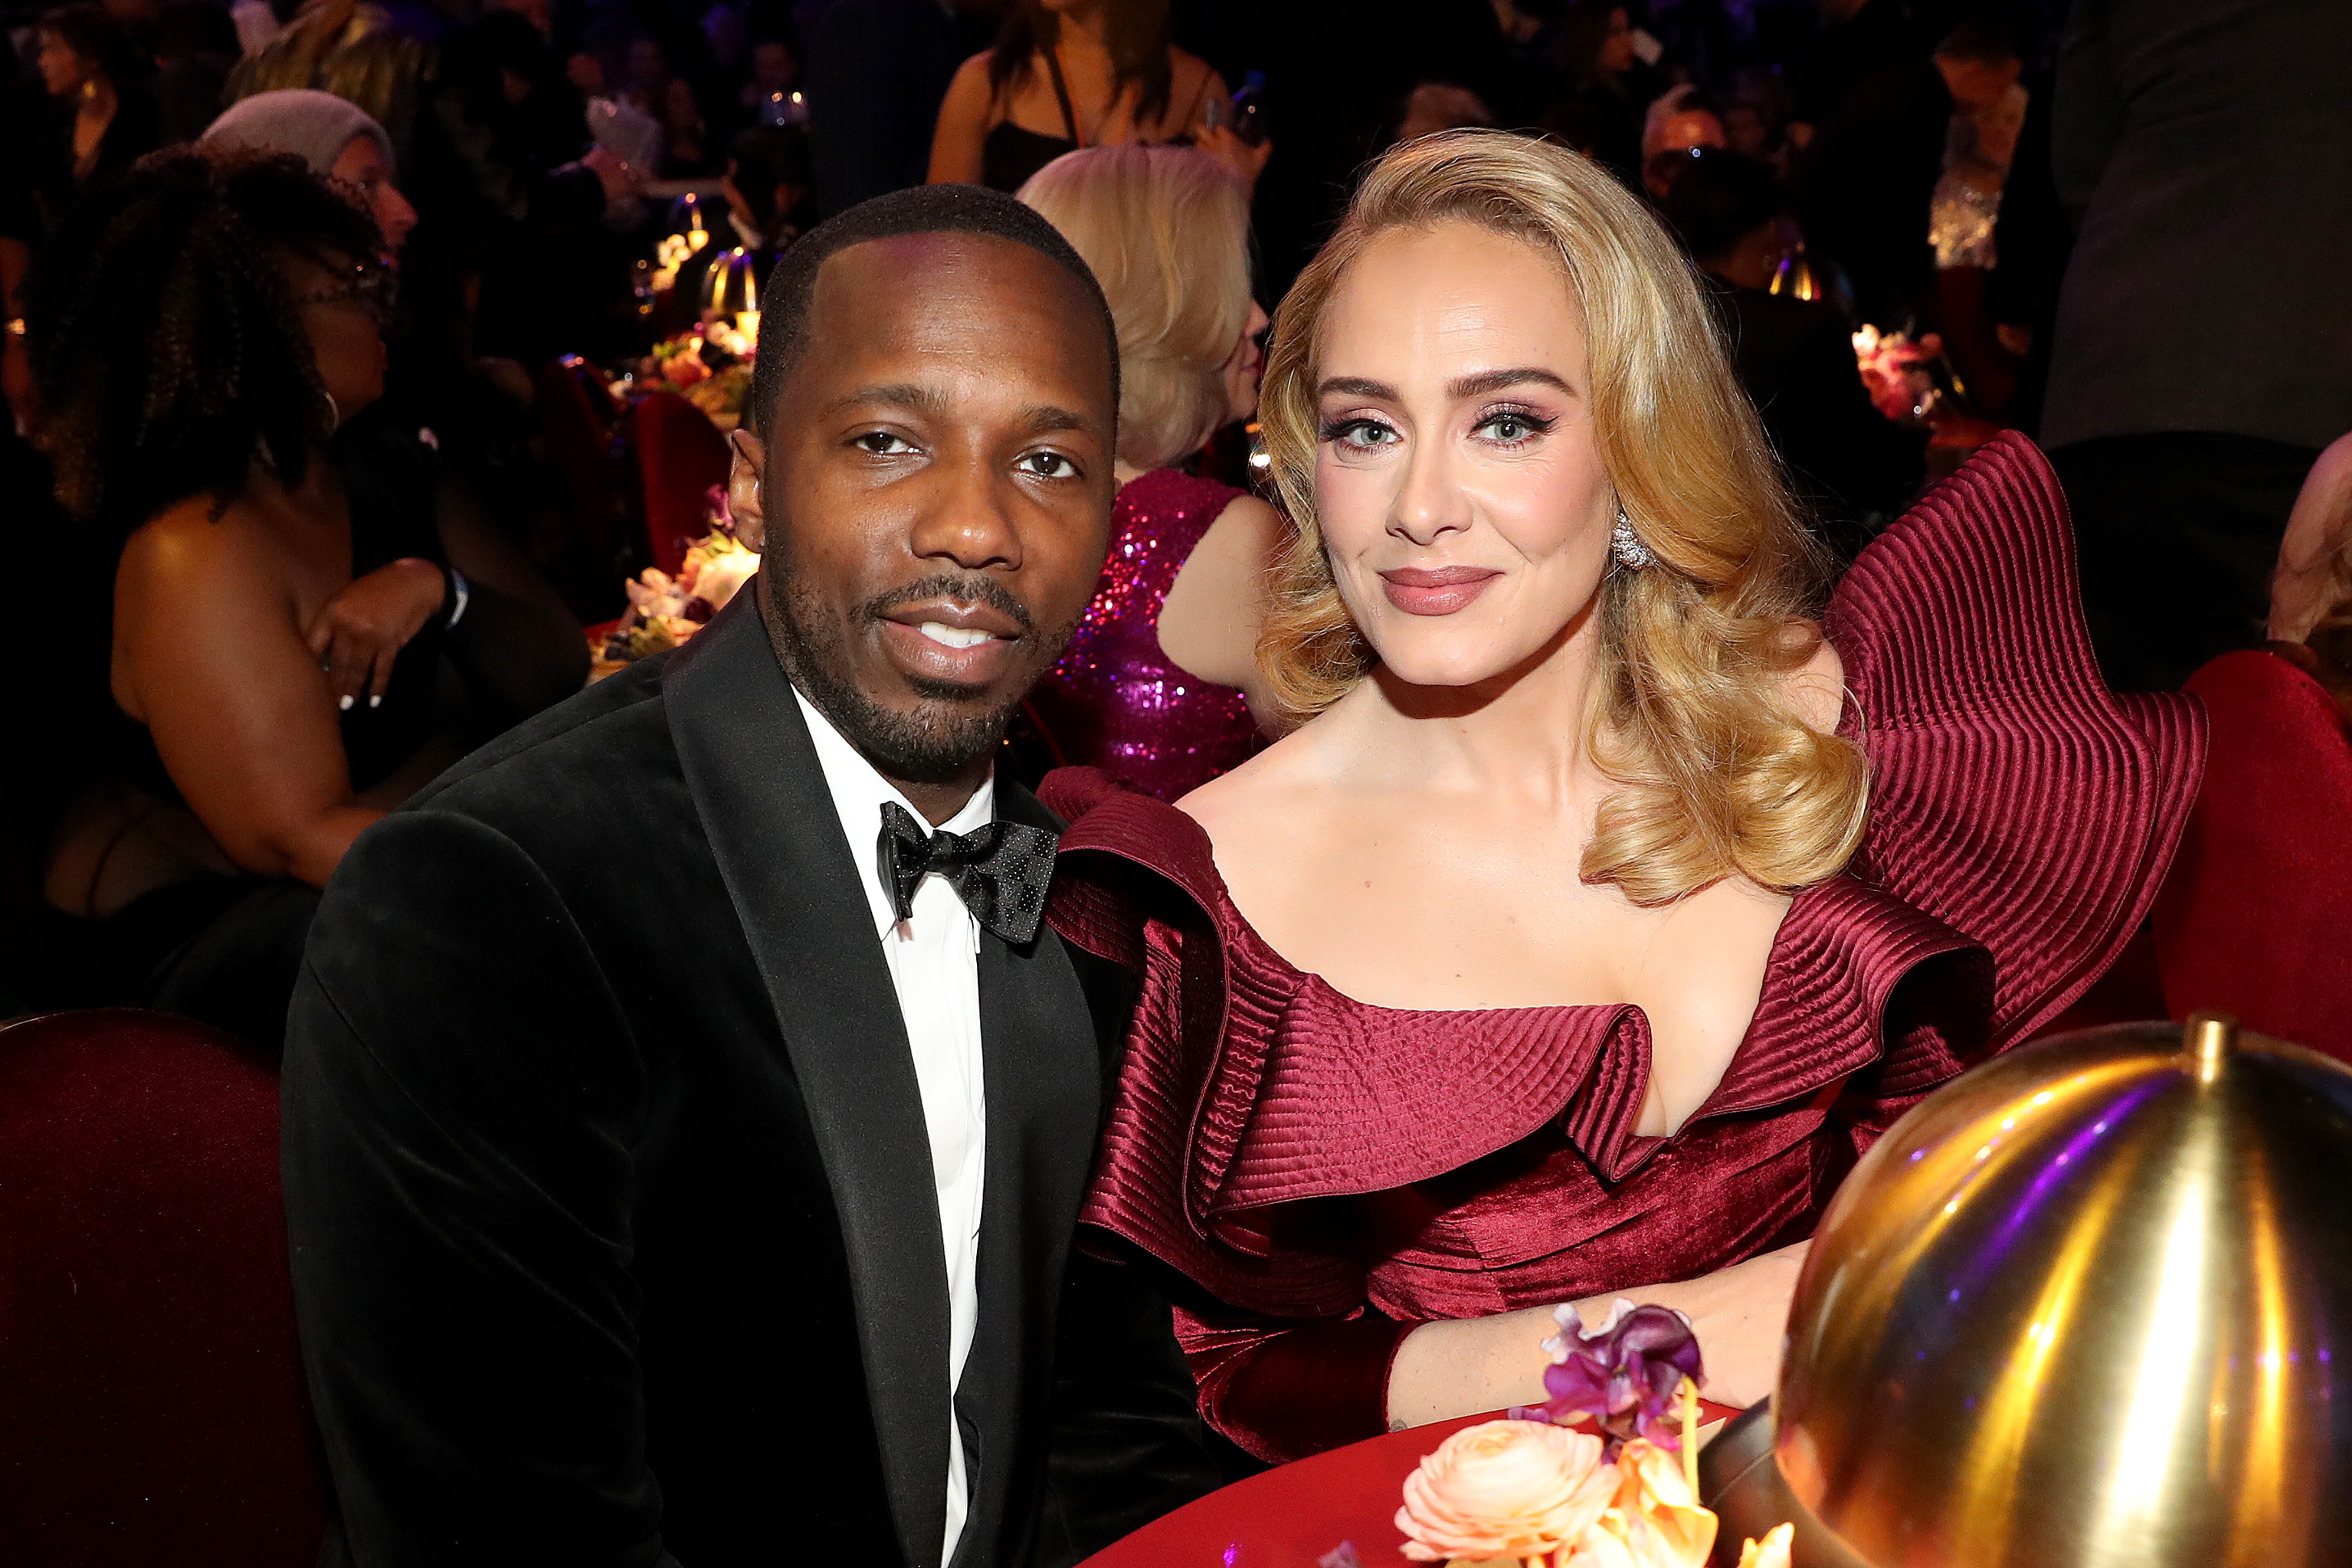 Rich Paul and Adele on February 05, 2023 in Los Angeles, California. | Source: Getty Images